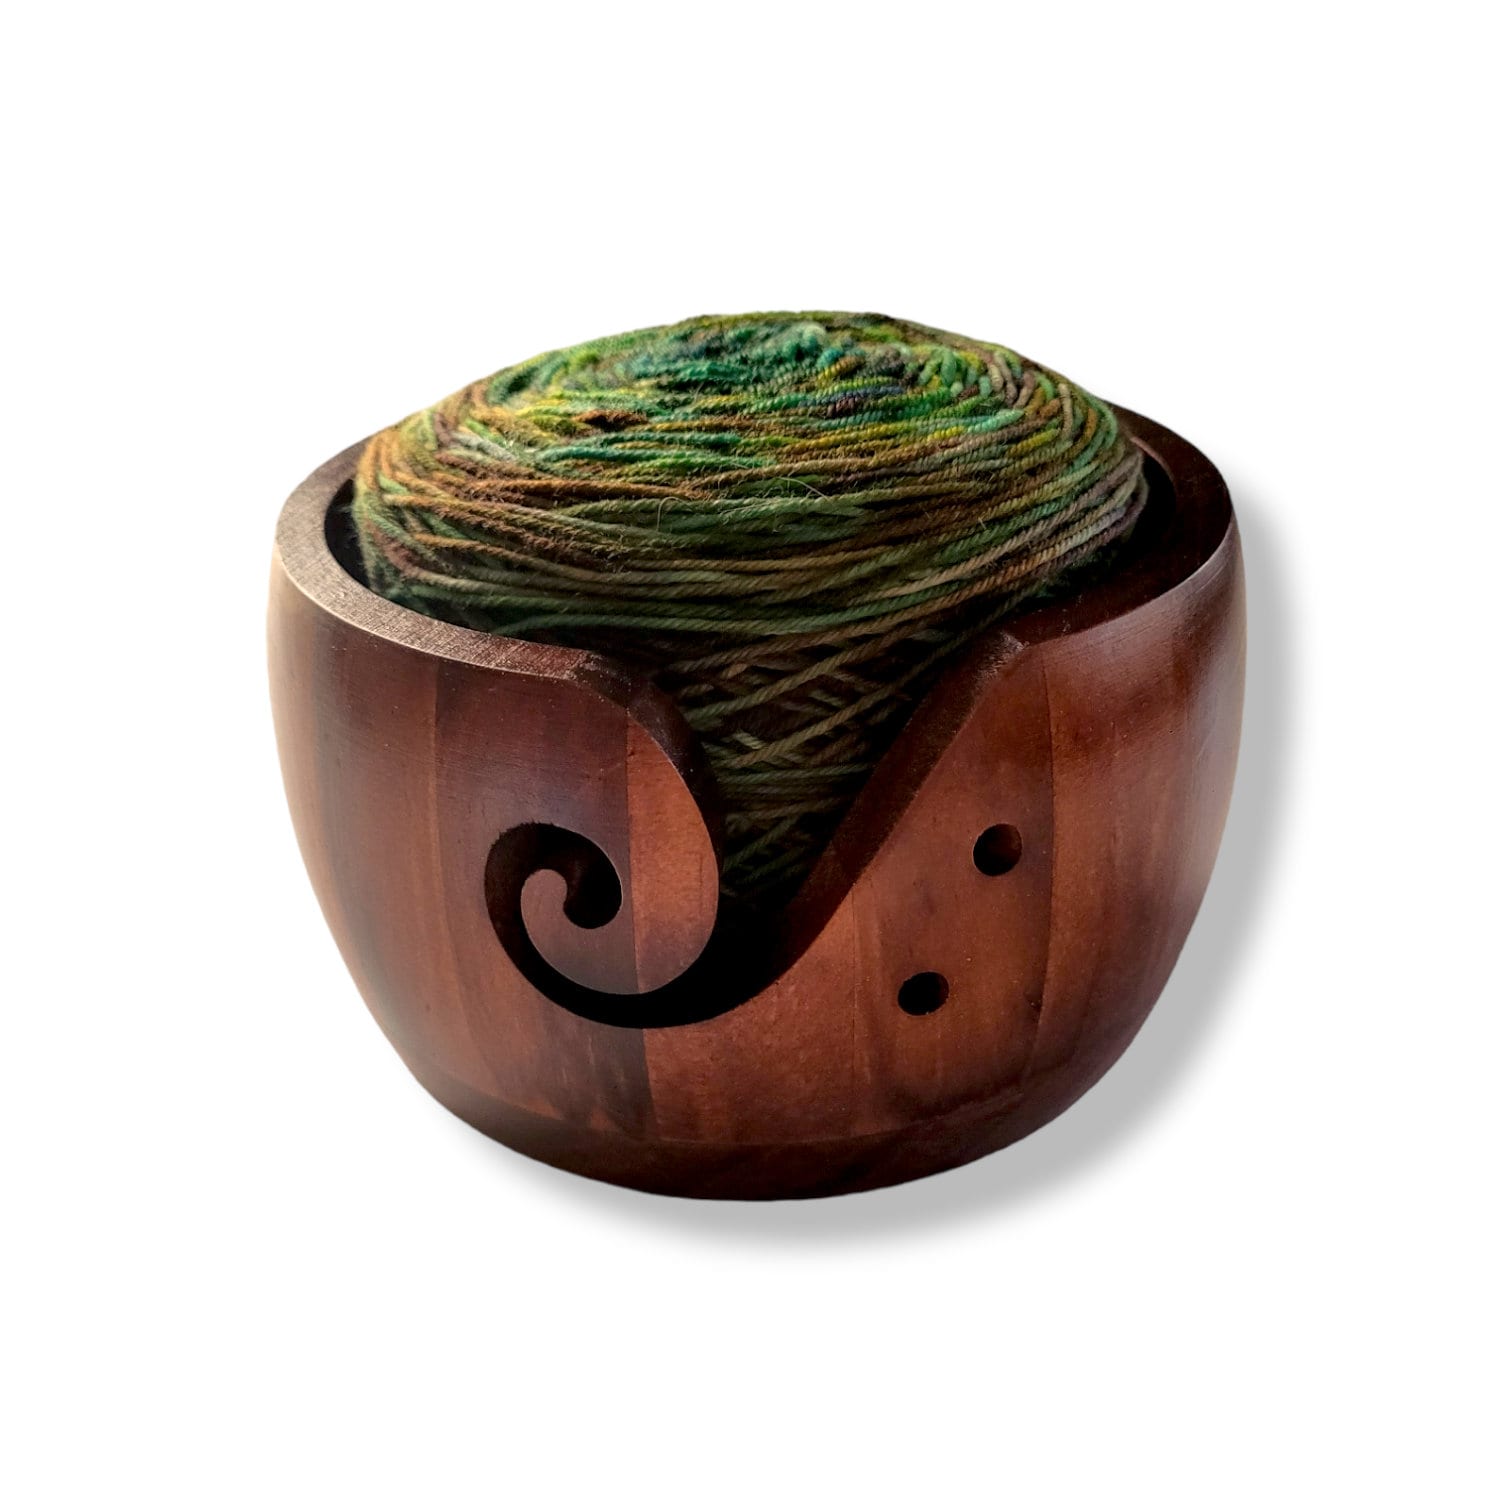 Eximious India Gifts for Women Wooden Yarn Bowl Holder Bowls for Knitting Crochet Yarn Winder Knitting Accessories and Supplies Large Size